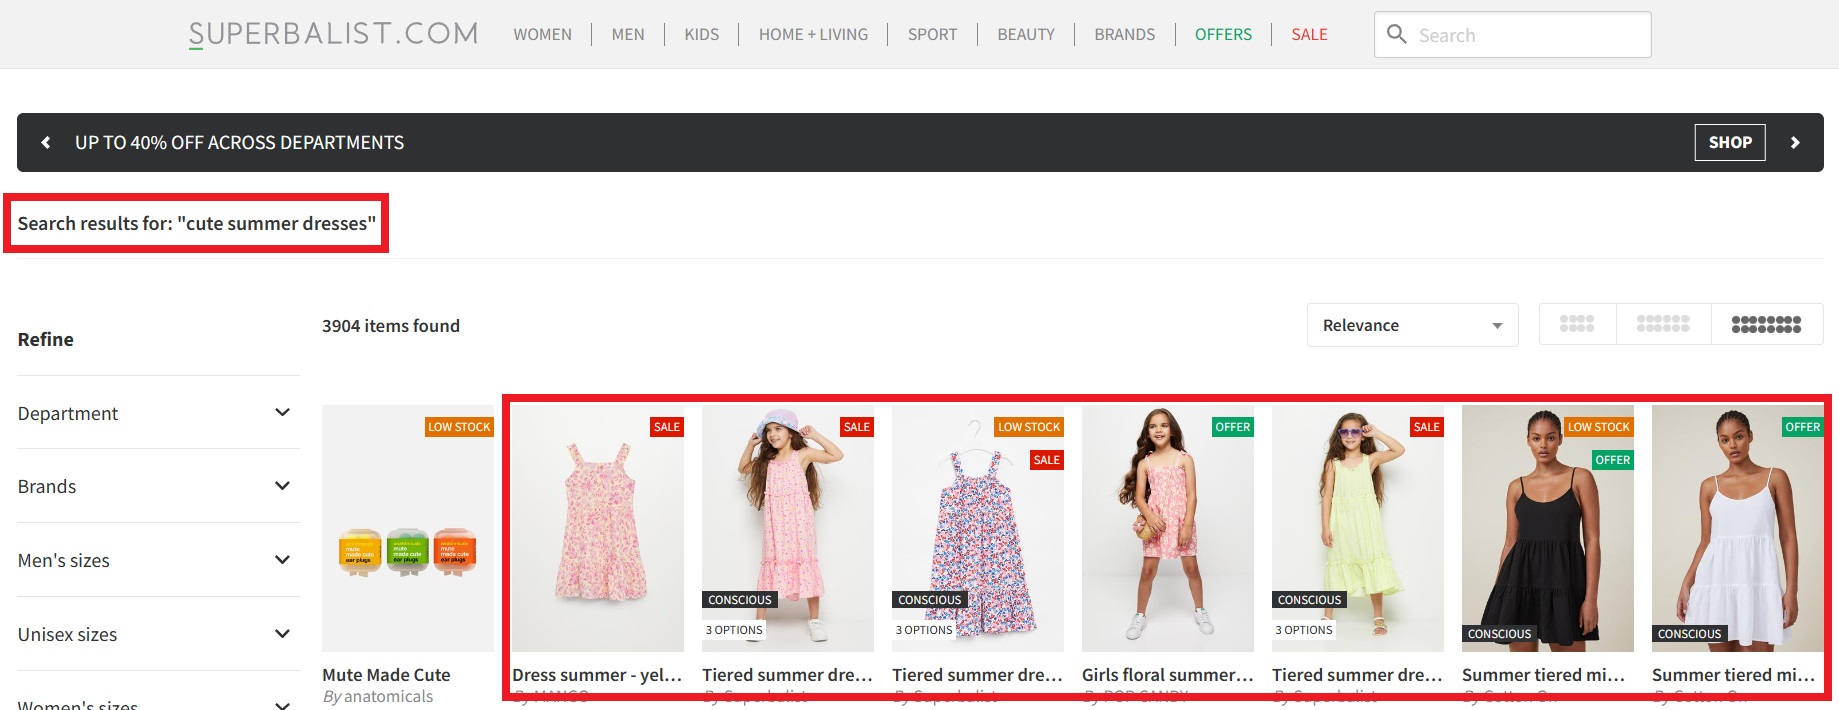 Screen shot of Superbalist's search results when looking "cute summer dresses"